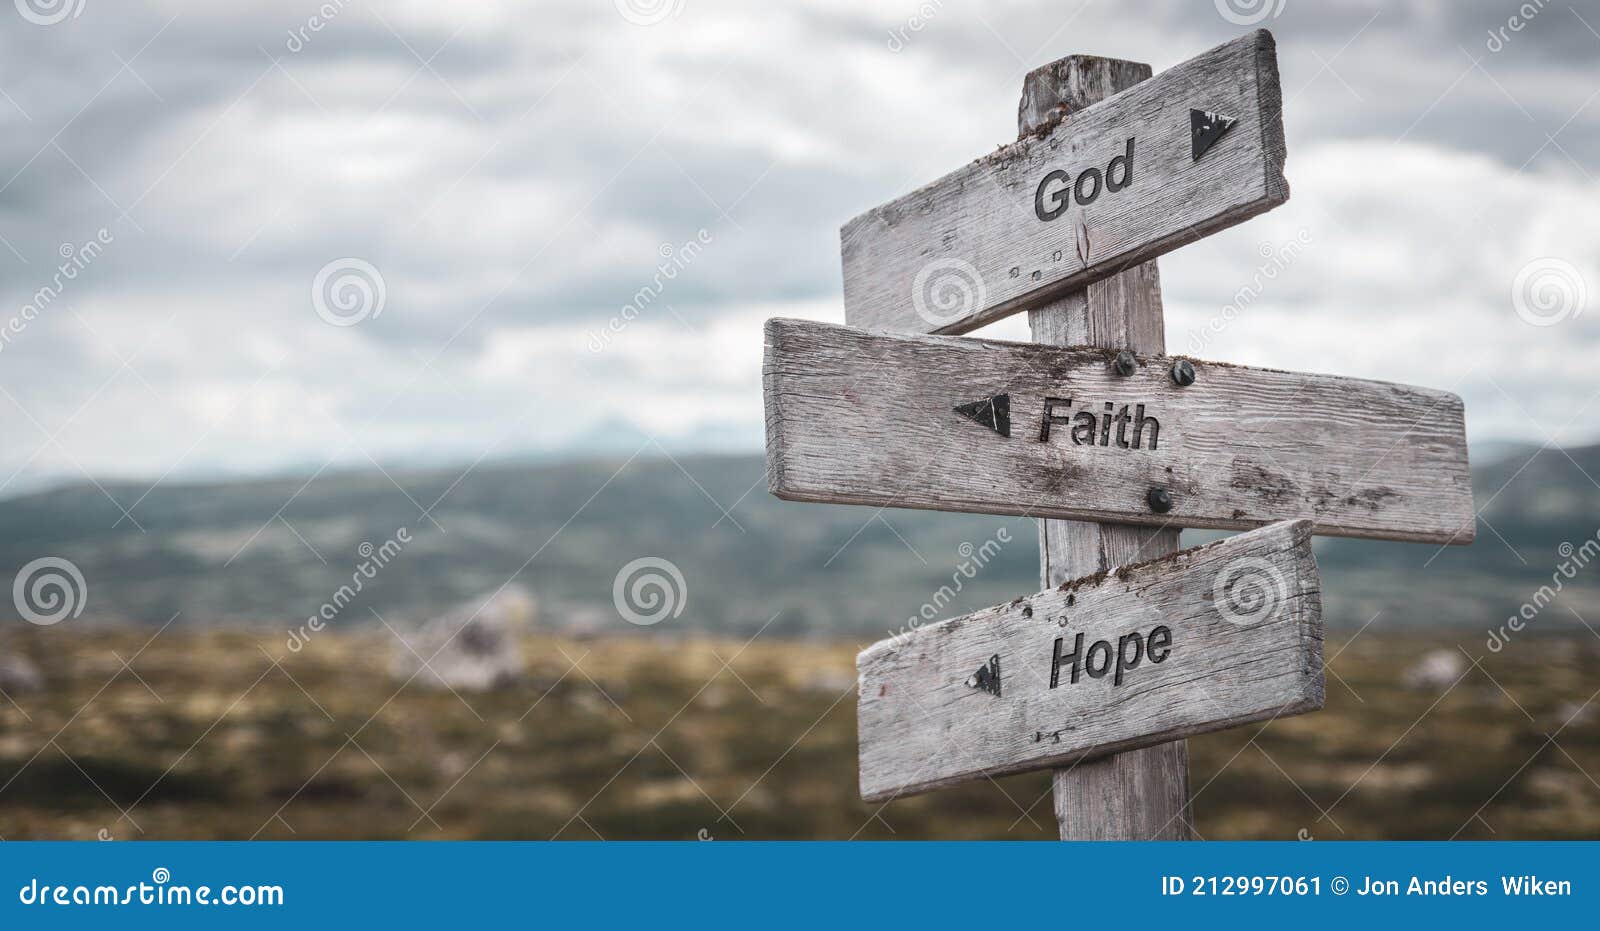 god faith hope text engraved on wooden signpost outdoors in nature.